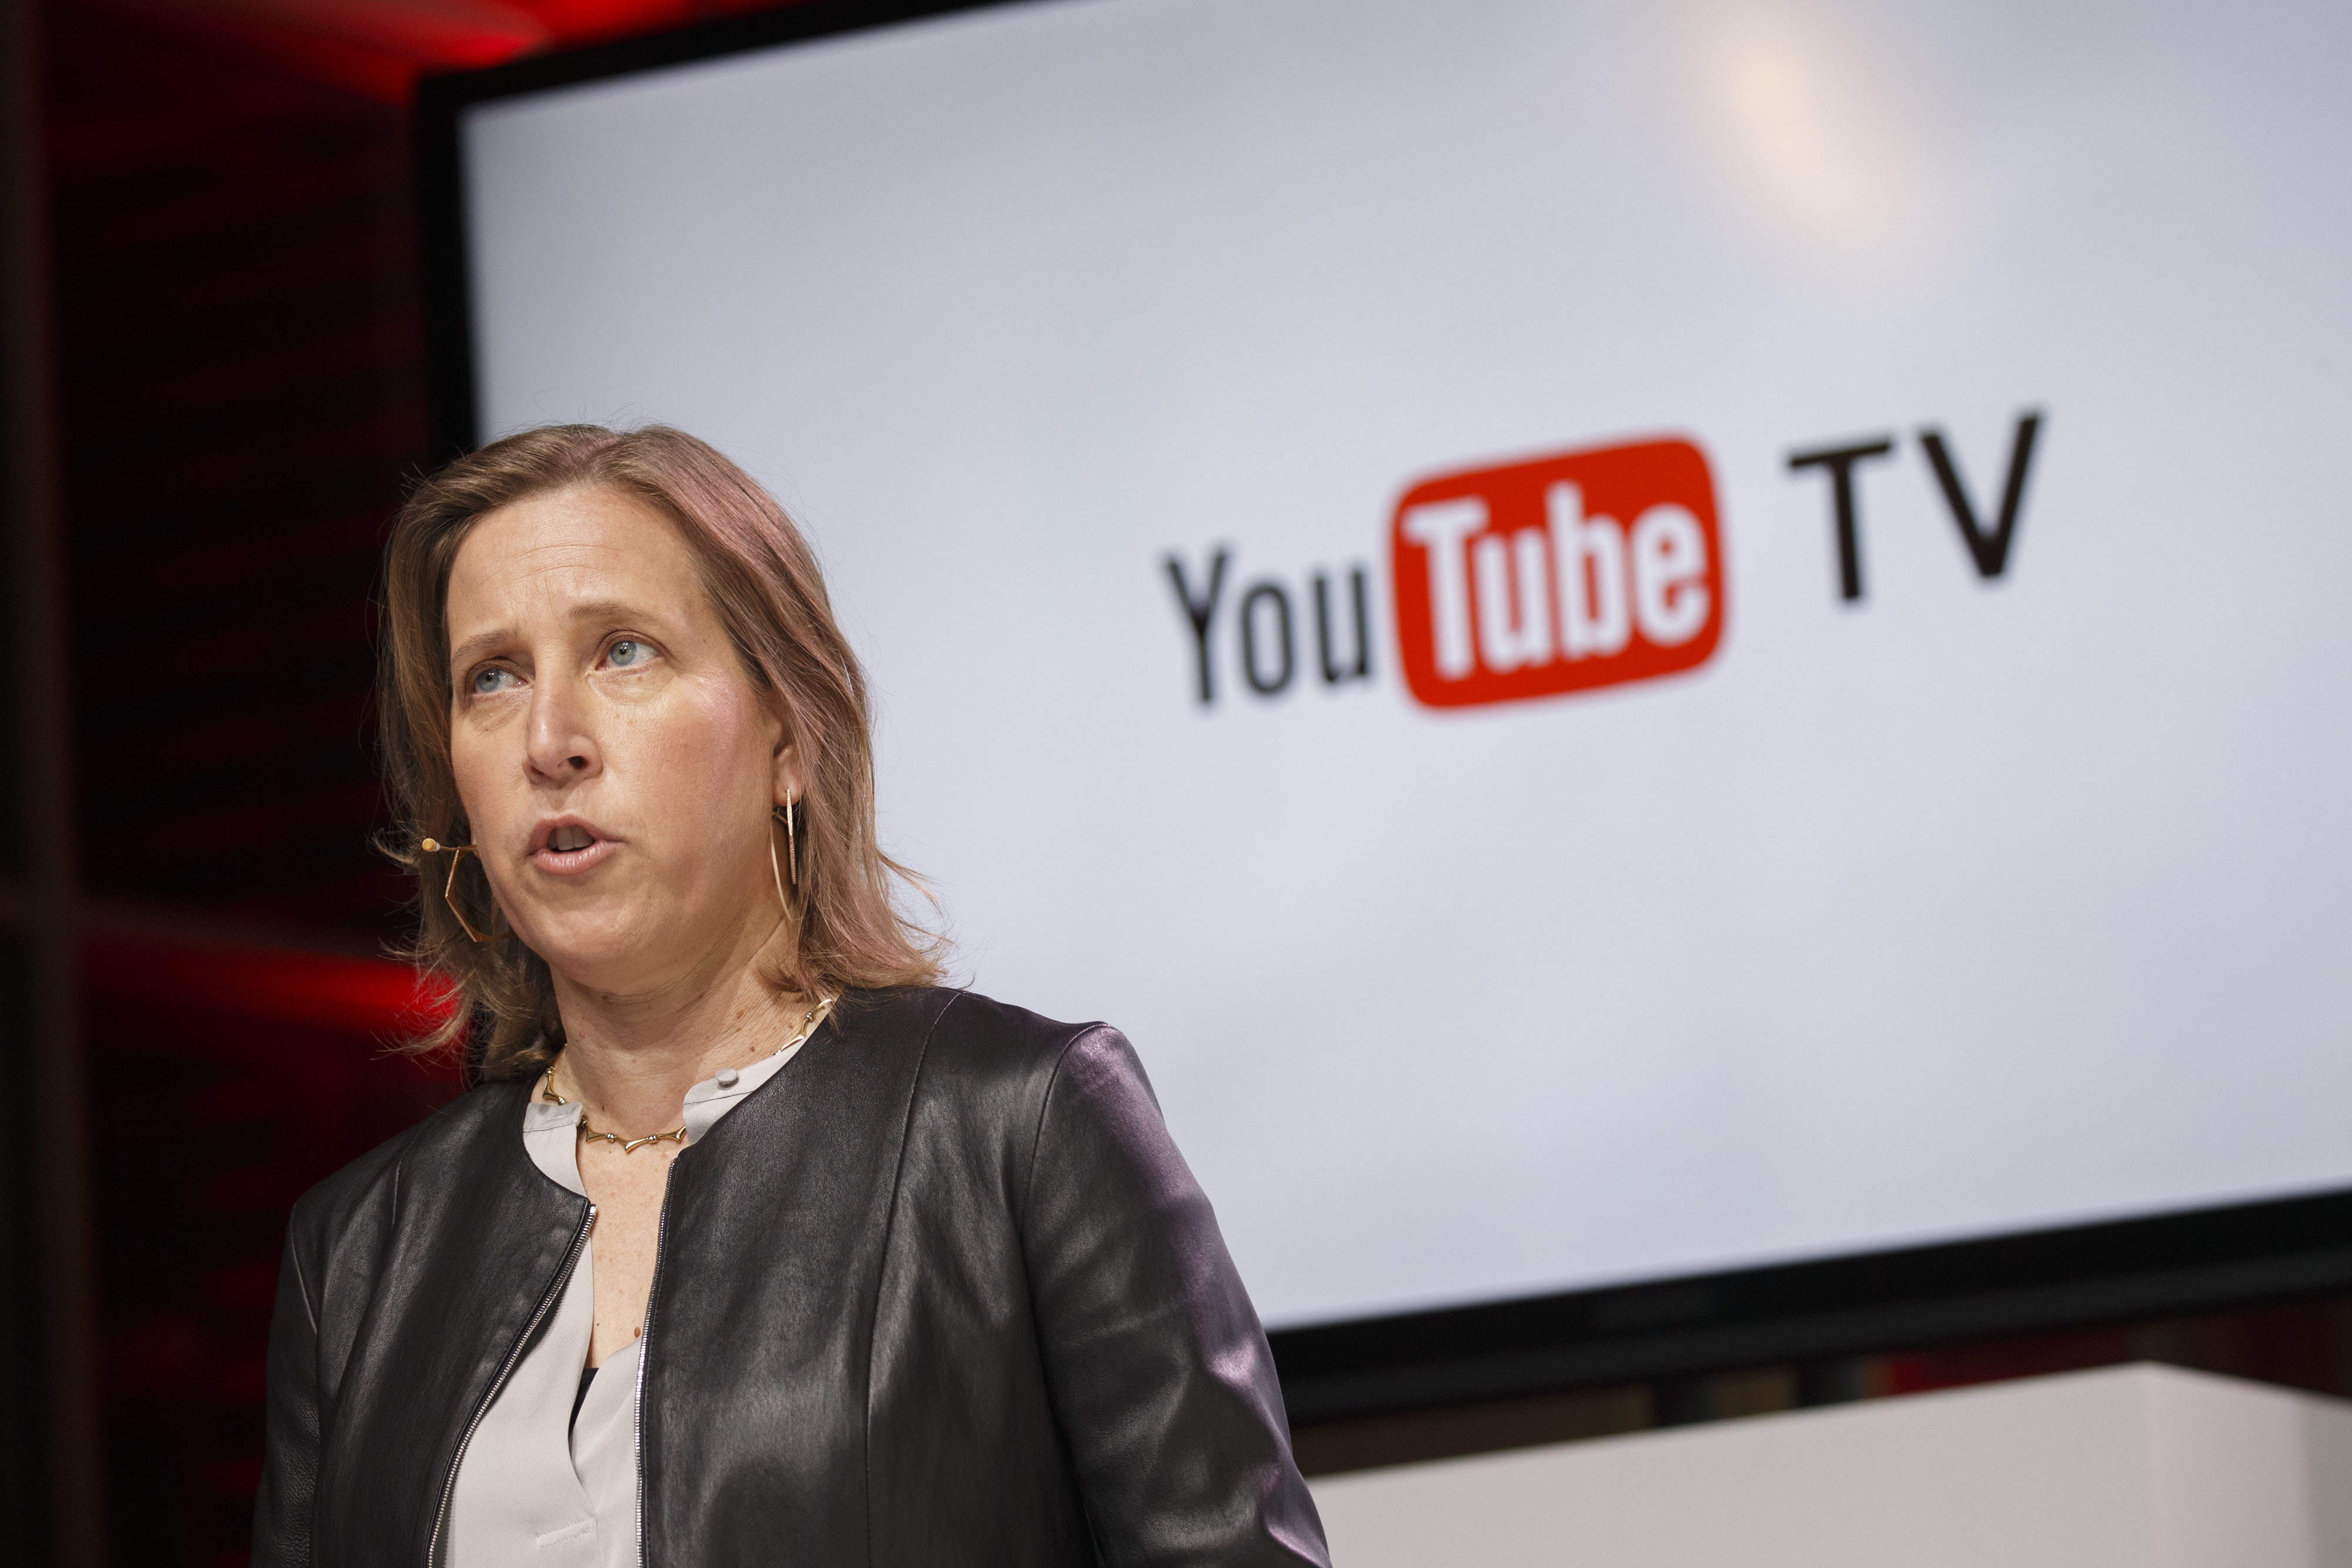 Susan Wojcicki, chief executive officer of YouTube Inc., introduces the company's new television subscription service at the YouTube Space LA venue in Los Angeles, California, U.S., on Tuesday, Feb. 28, 2017. (Bloomberg—Bloomberg via Getty Images)